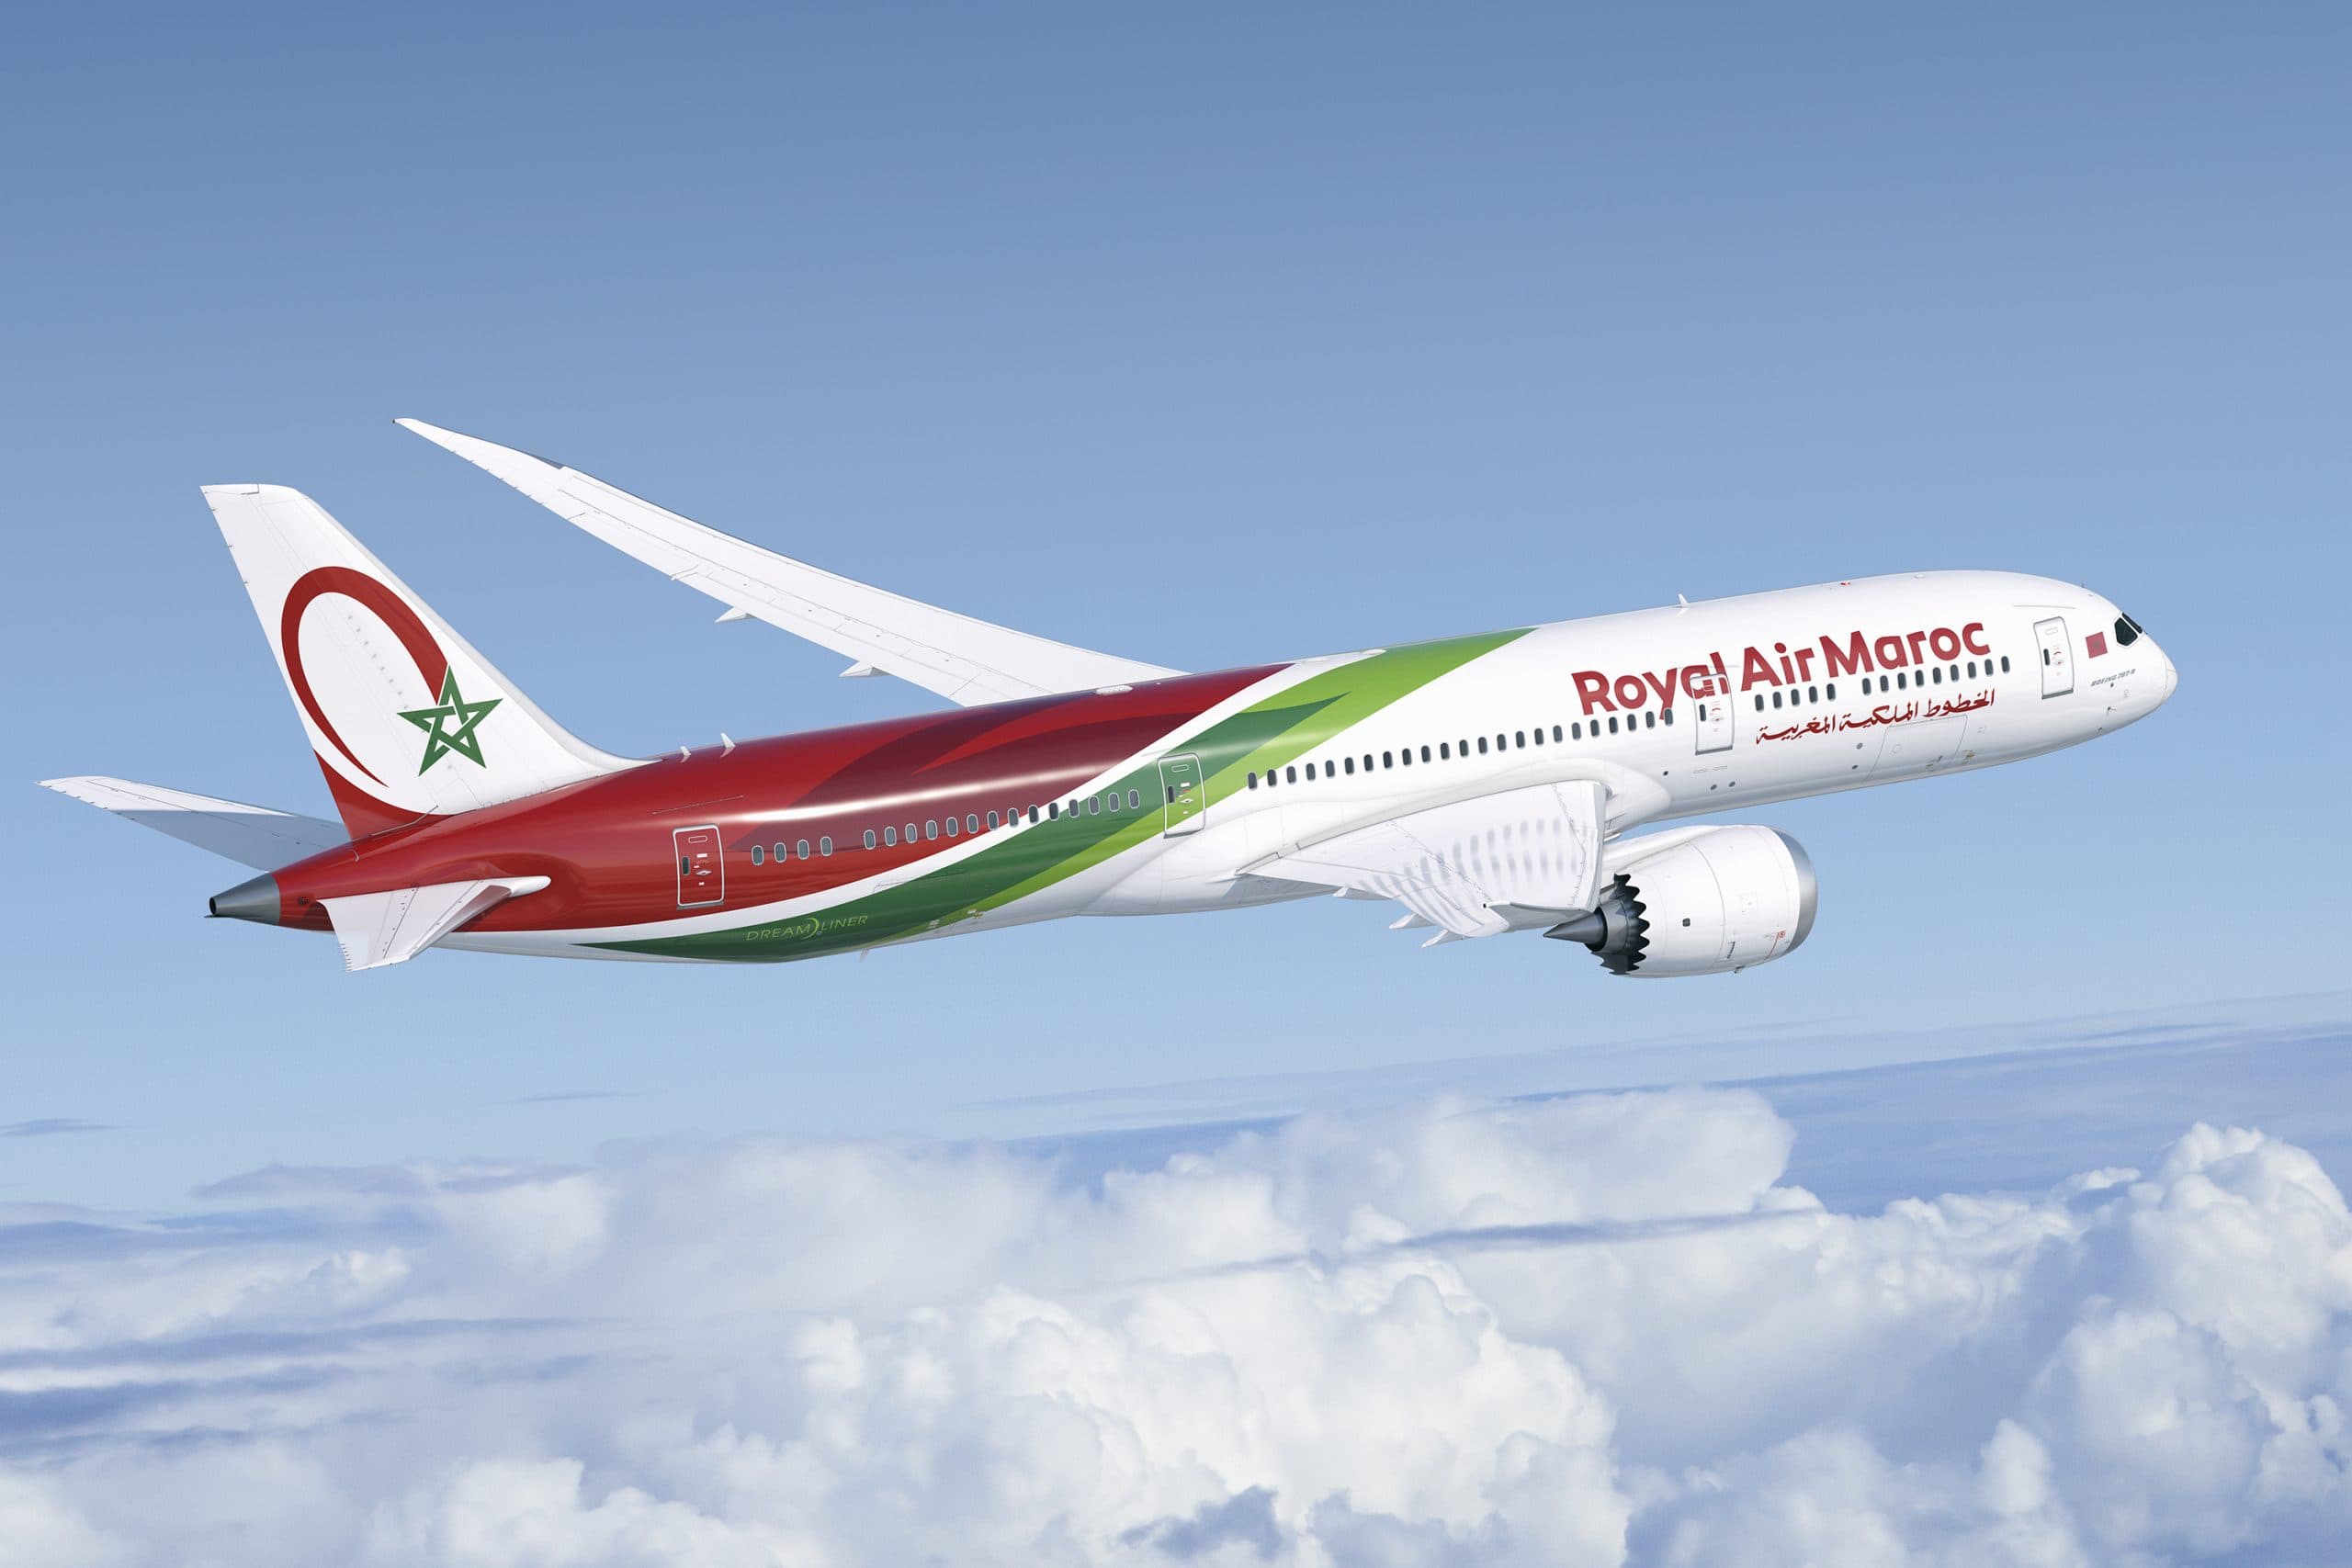 Best Seats on Royal Air Maroc 7878 Travelling on Points